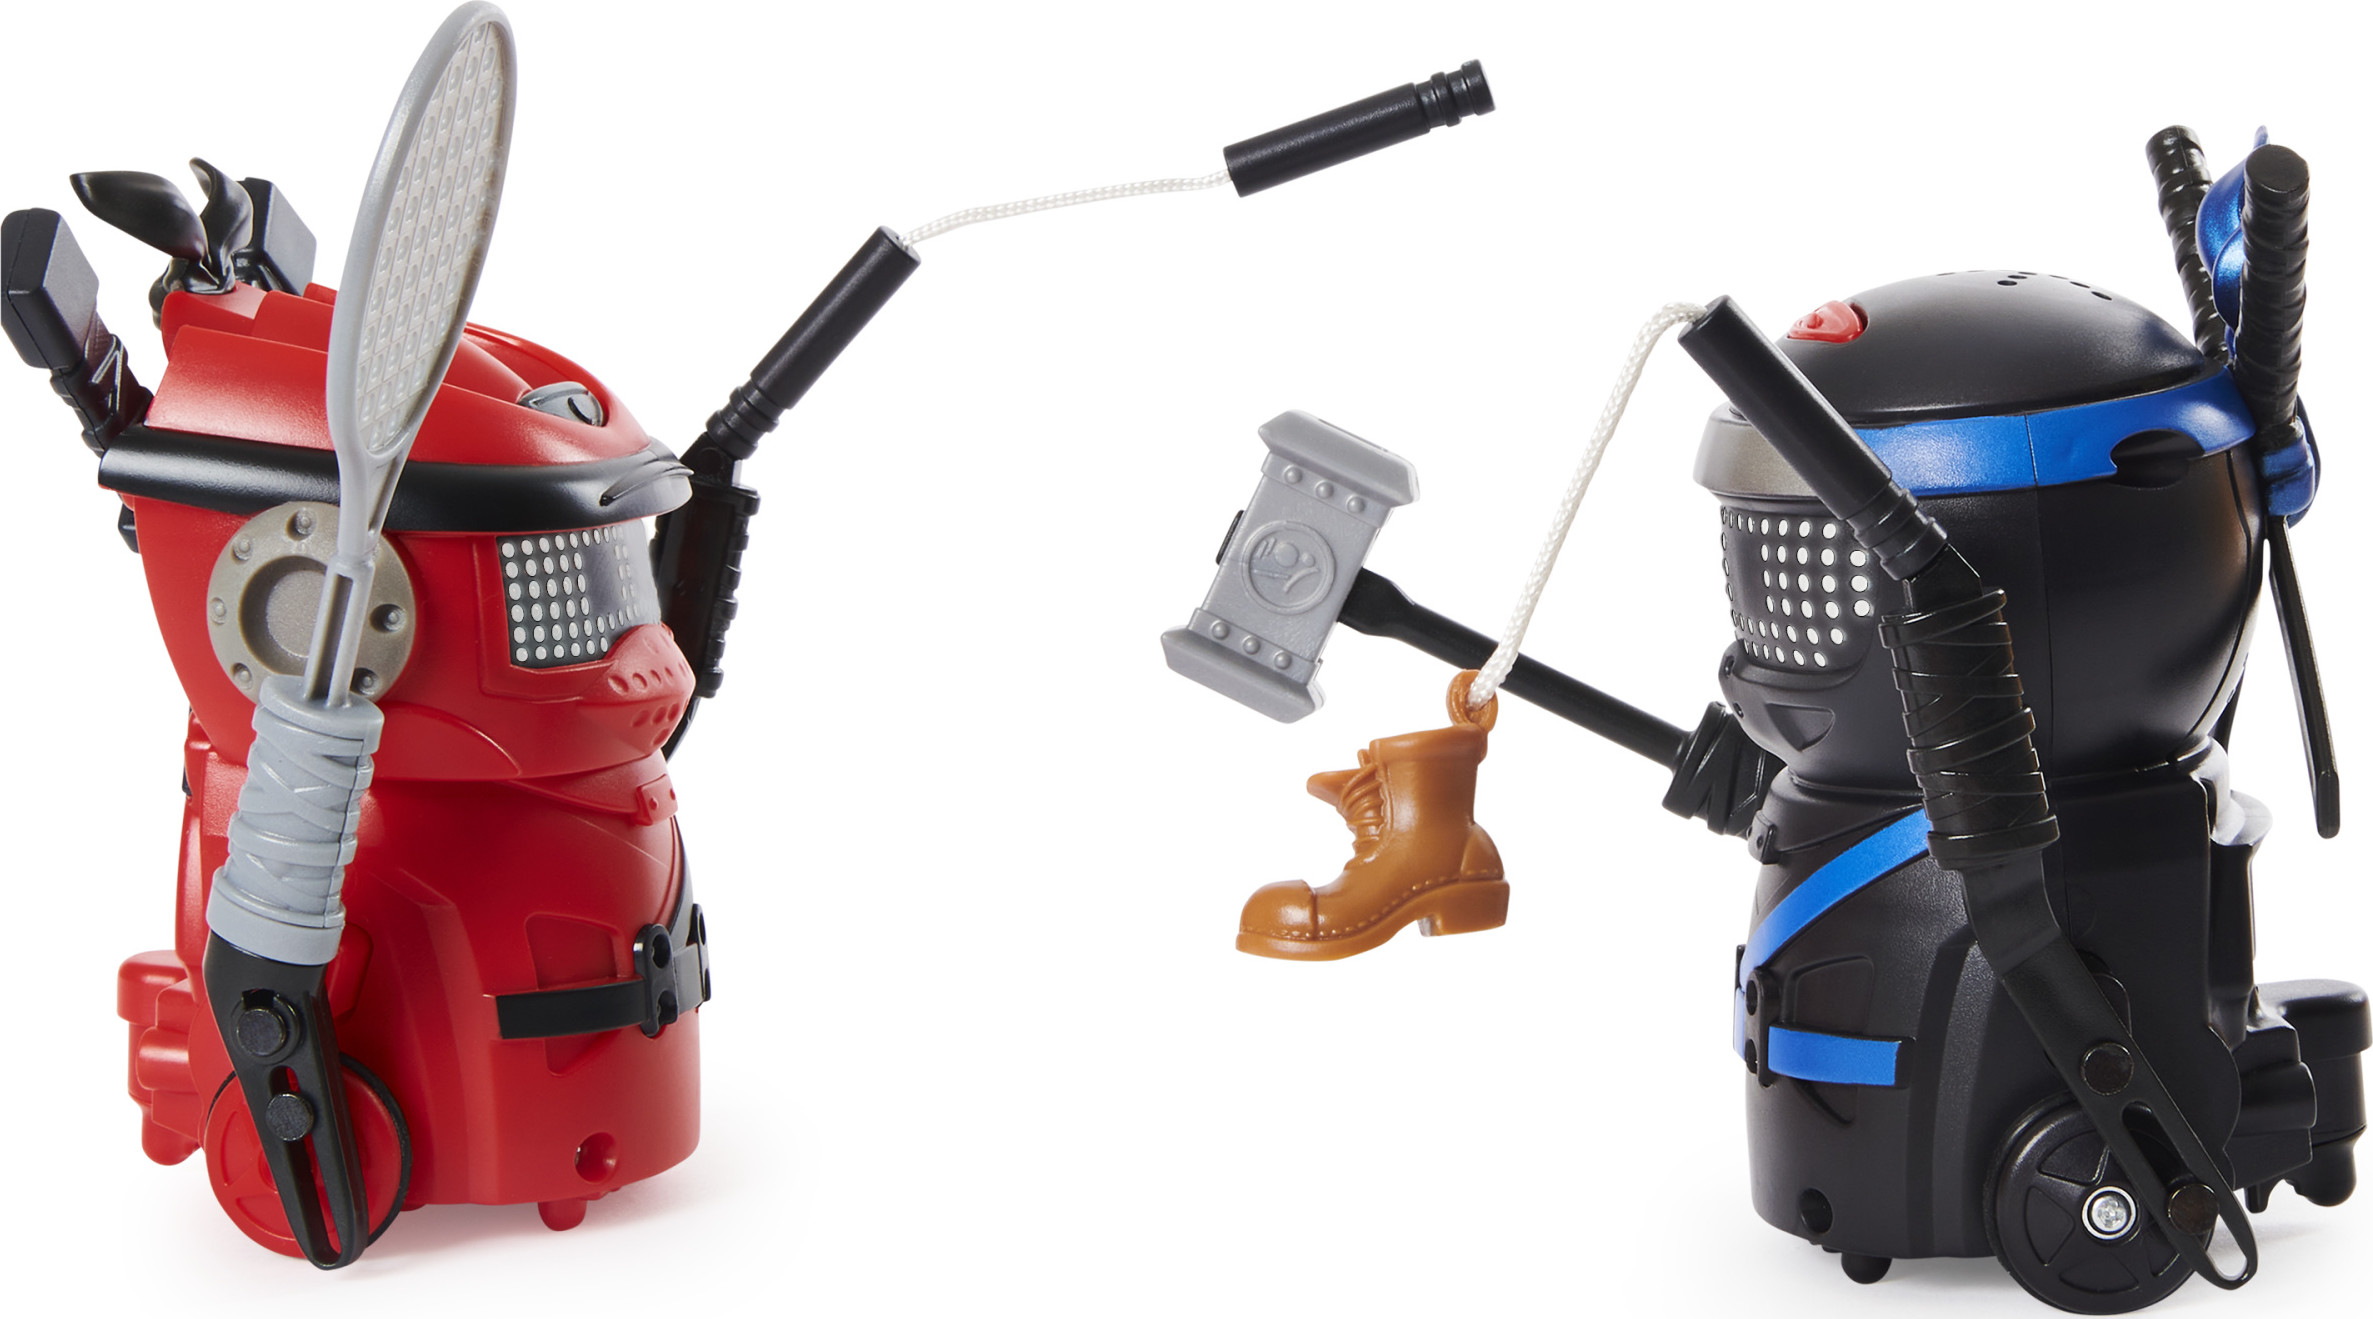 Ninja Bots 2-Pack, Hilarious Battling Robots (Red/Black) with 6 Weapons and Over 100 Sounds and Movements - image 1 of 9